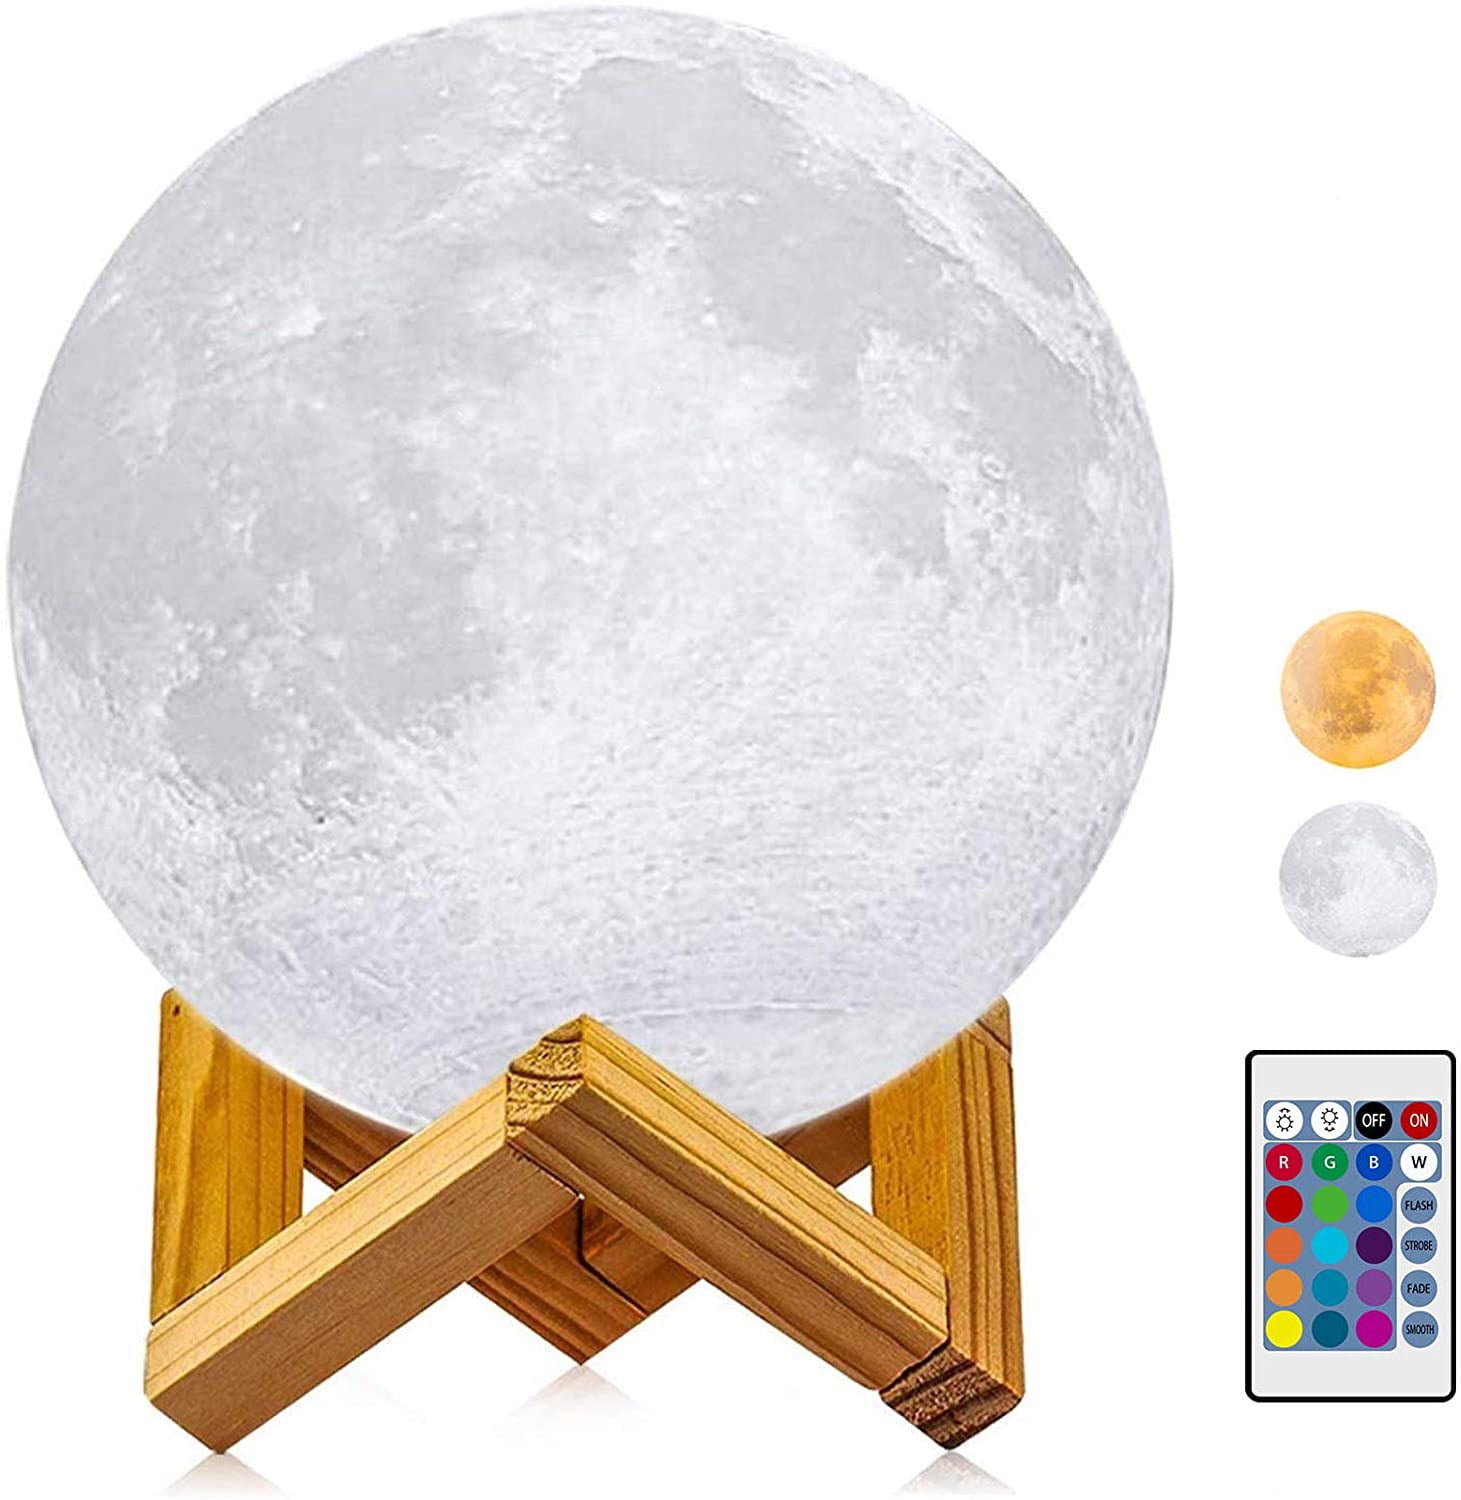 3D Moon Lamp 16 LED Colors Lunar Night Light Remote Home Decor Gift with Stand 